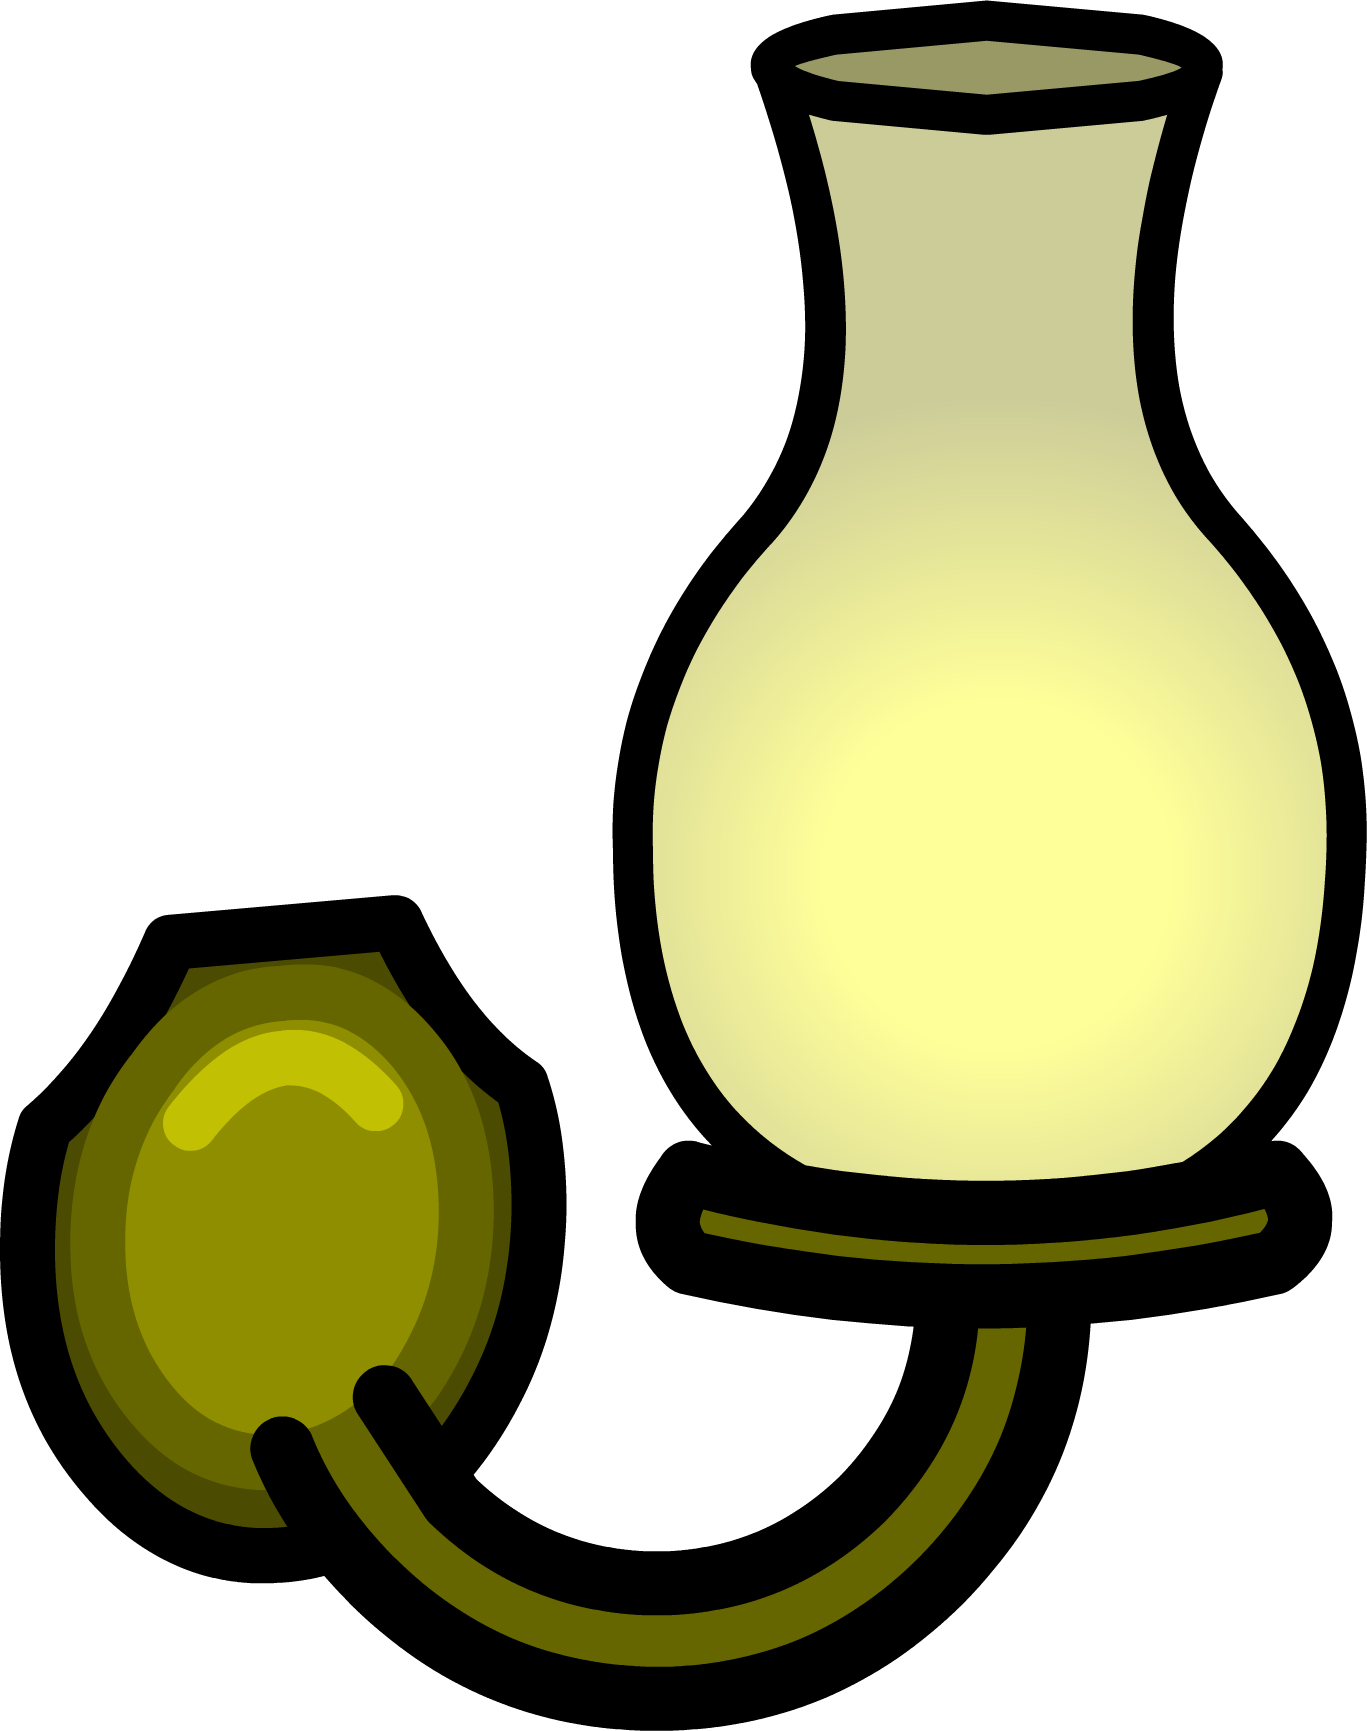 On Wall Lamp Clipart, Explore Pictures For Lamp Clipart - Club Penguin Wall Lights (1367x1731)